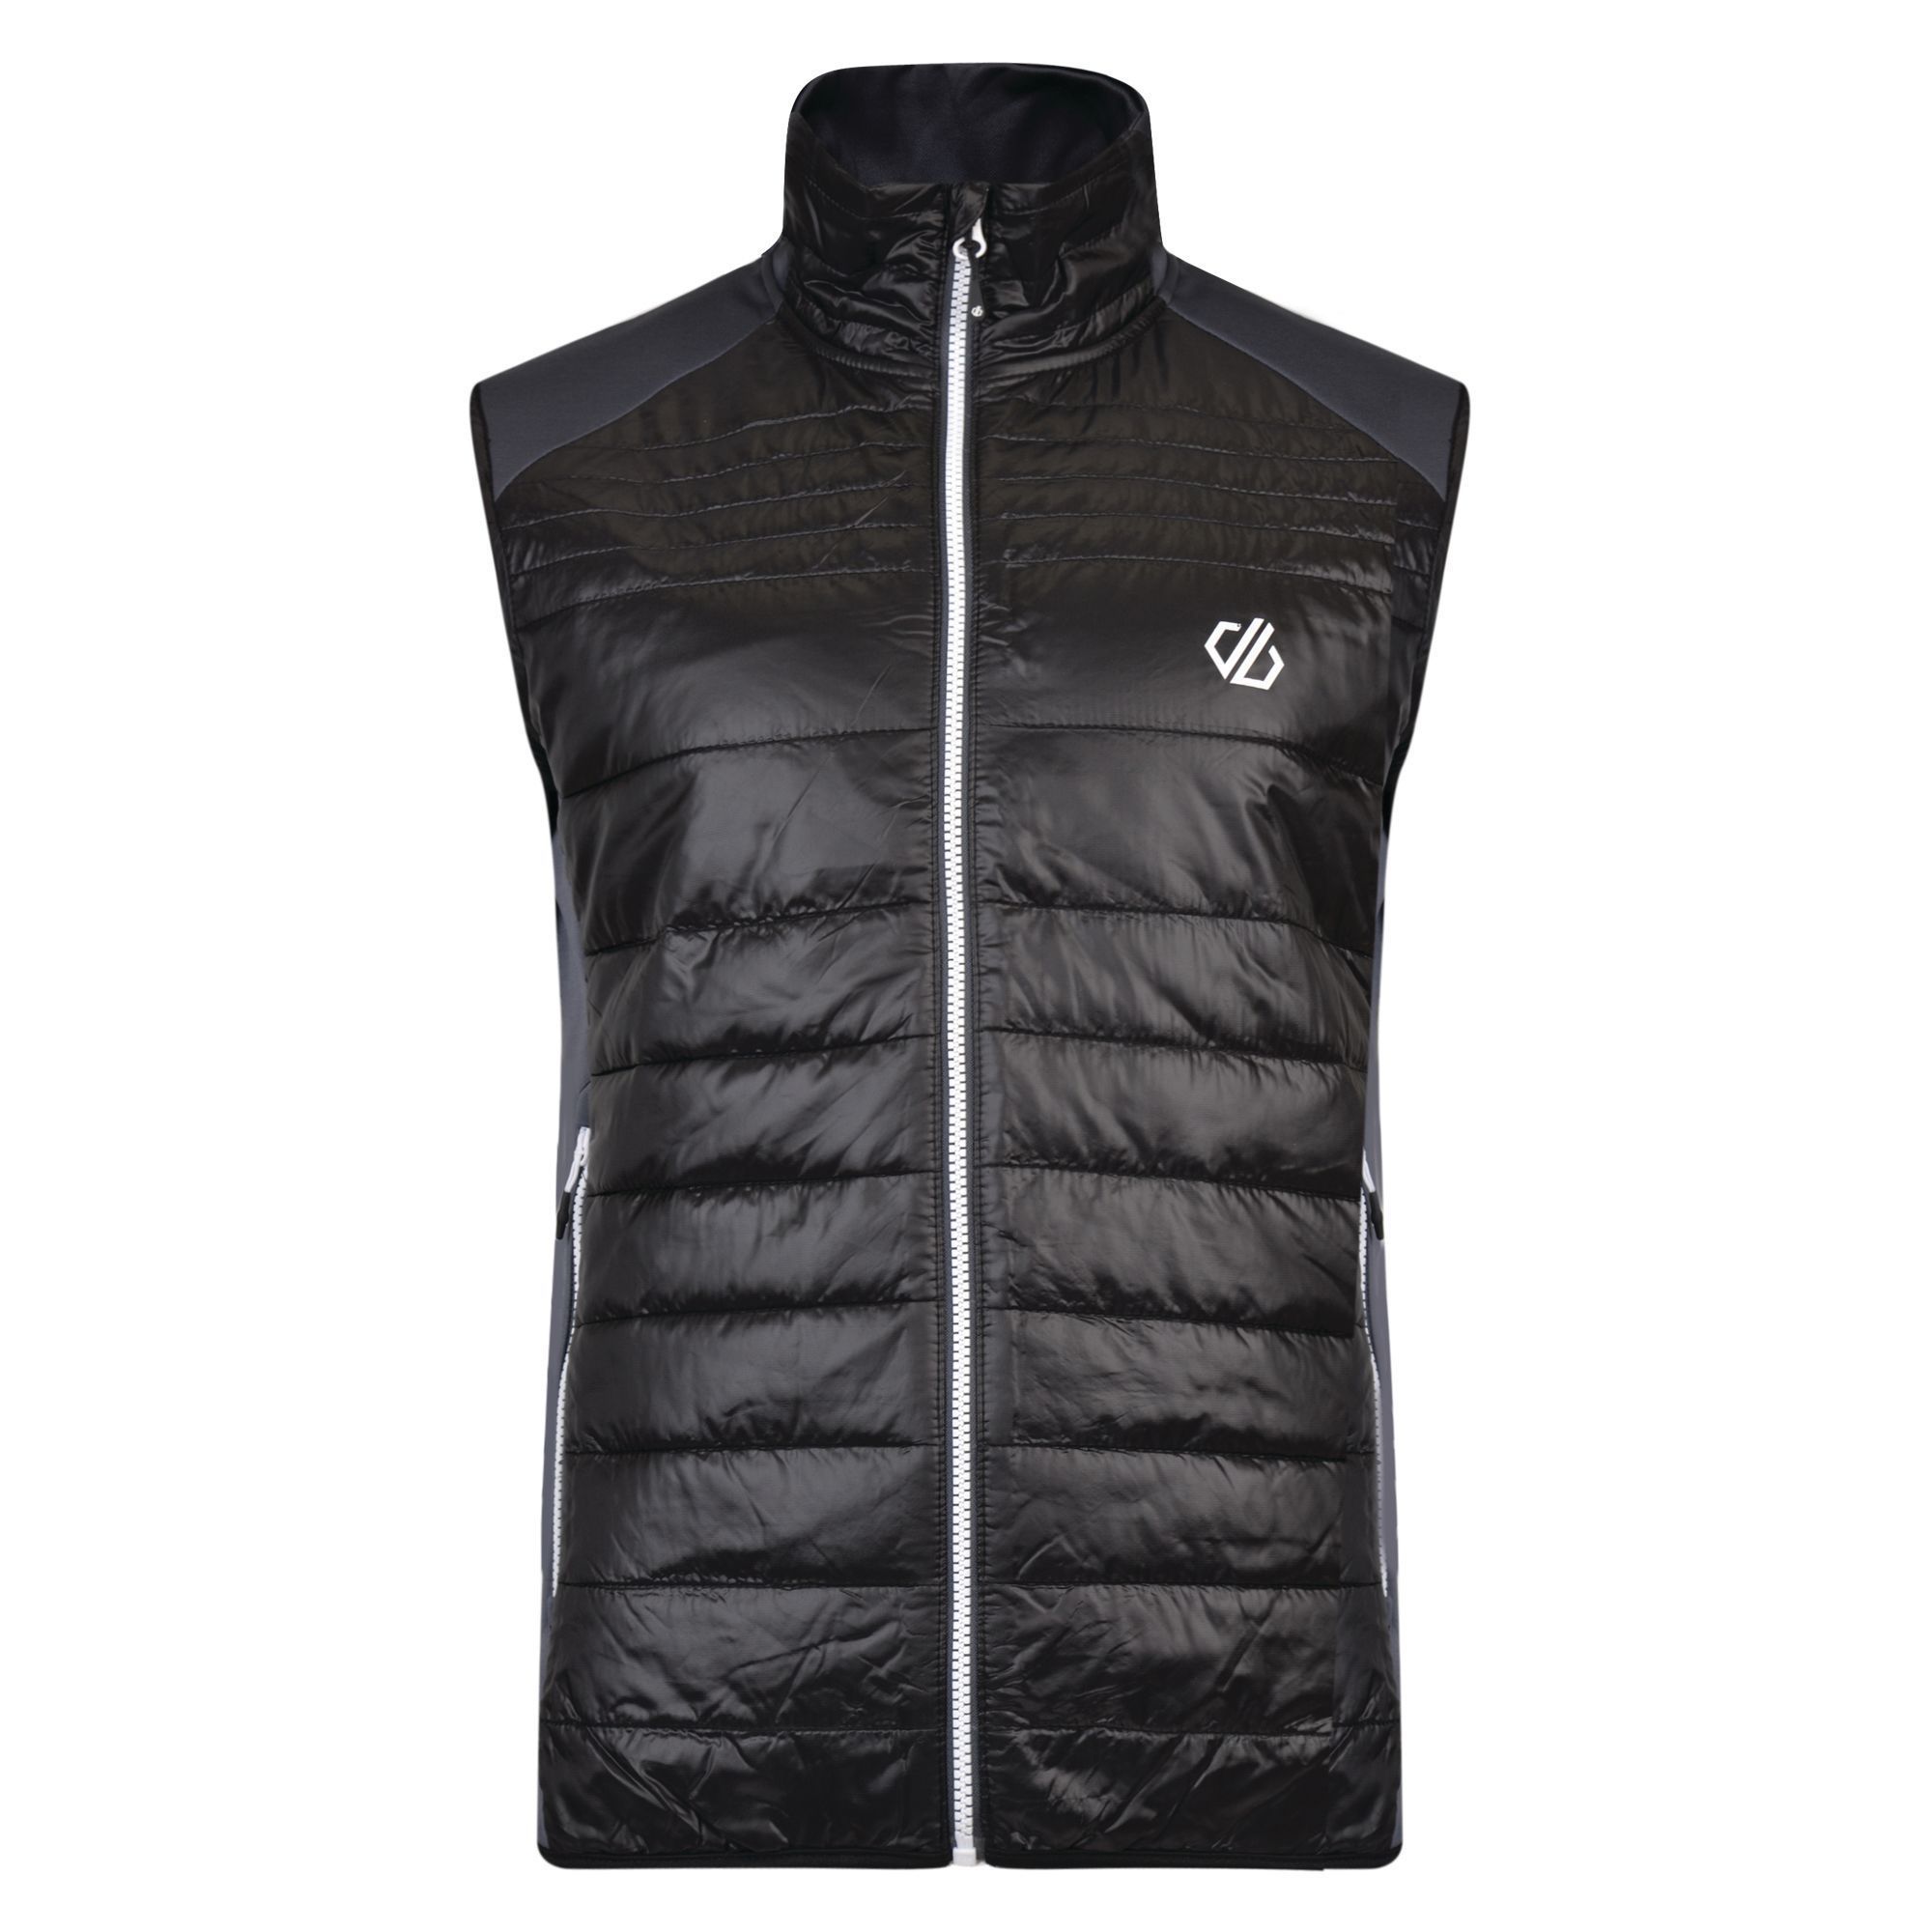 100% Polyester. ILoft Hybrid Microwarmth with polyester ripstop and core stretch mix. Alpaca wool mix insulation. Natural wicking and  odour control properties. 2 x lower zip pockets.